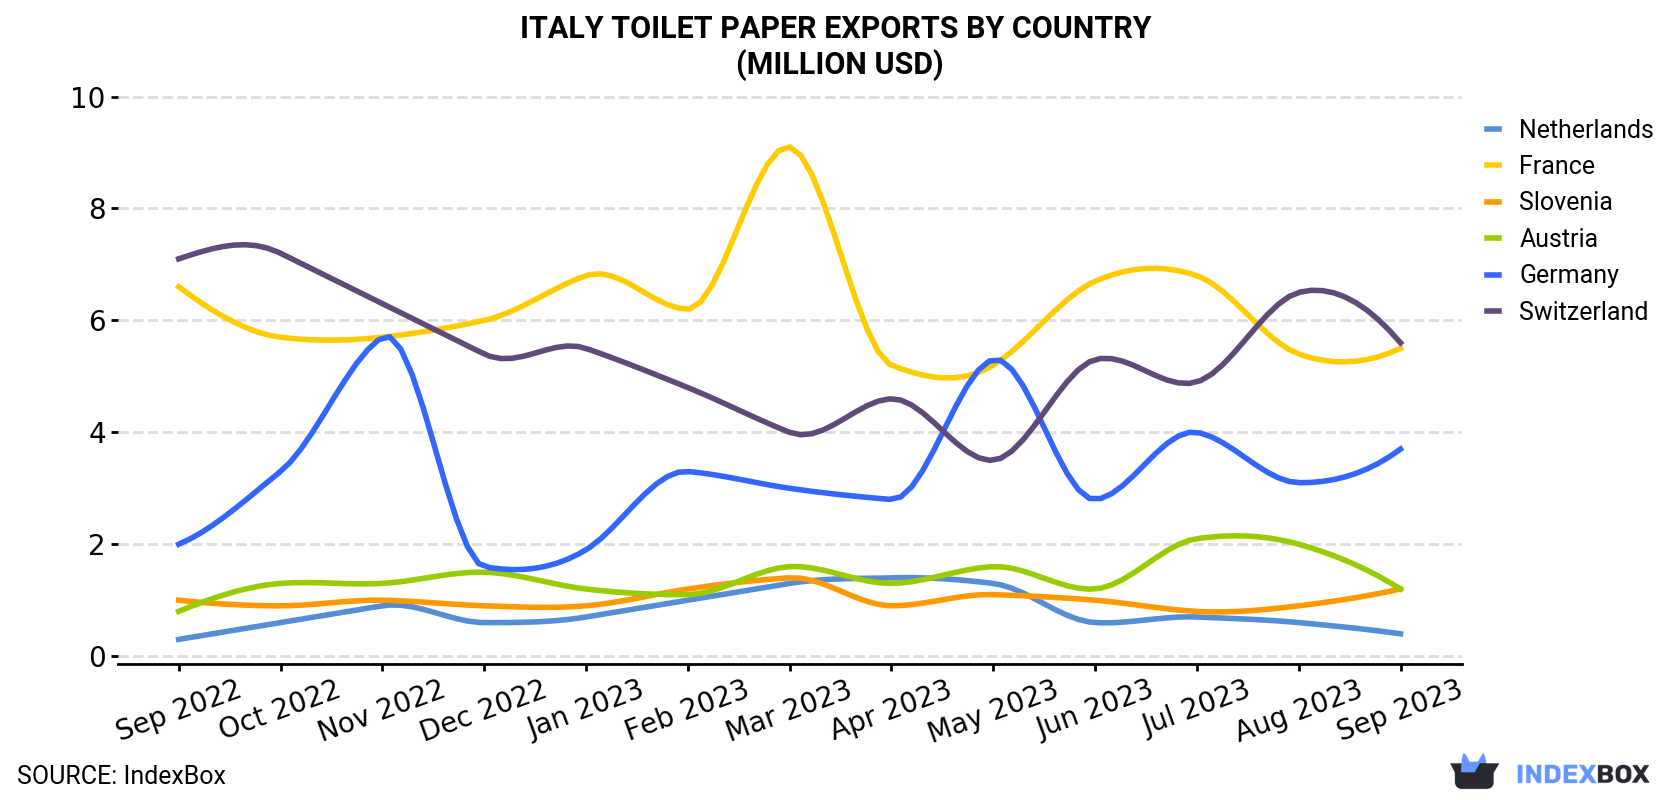 Italy Toilet Paper Exports By Country (Million USD)